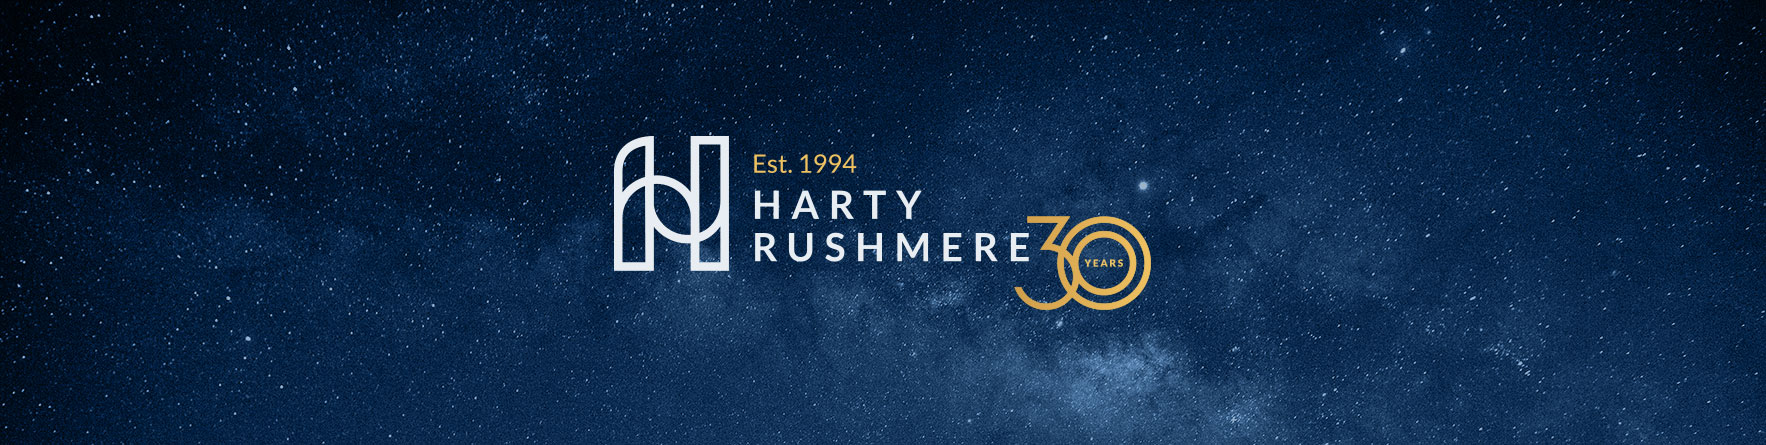 harty rushmere 30 years since 1994